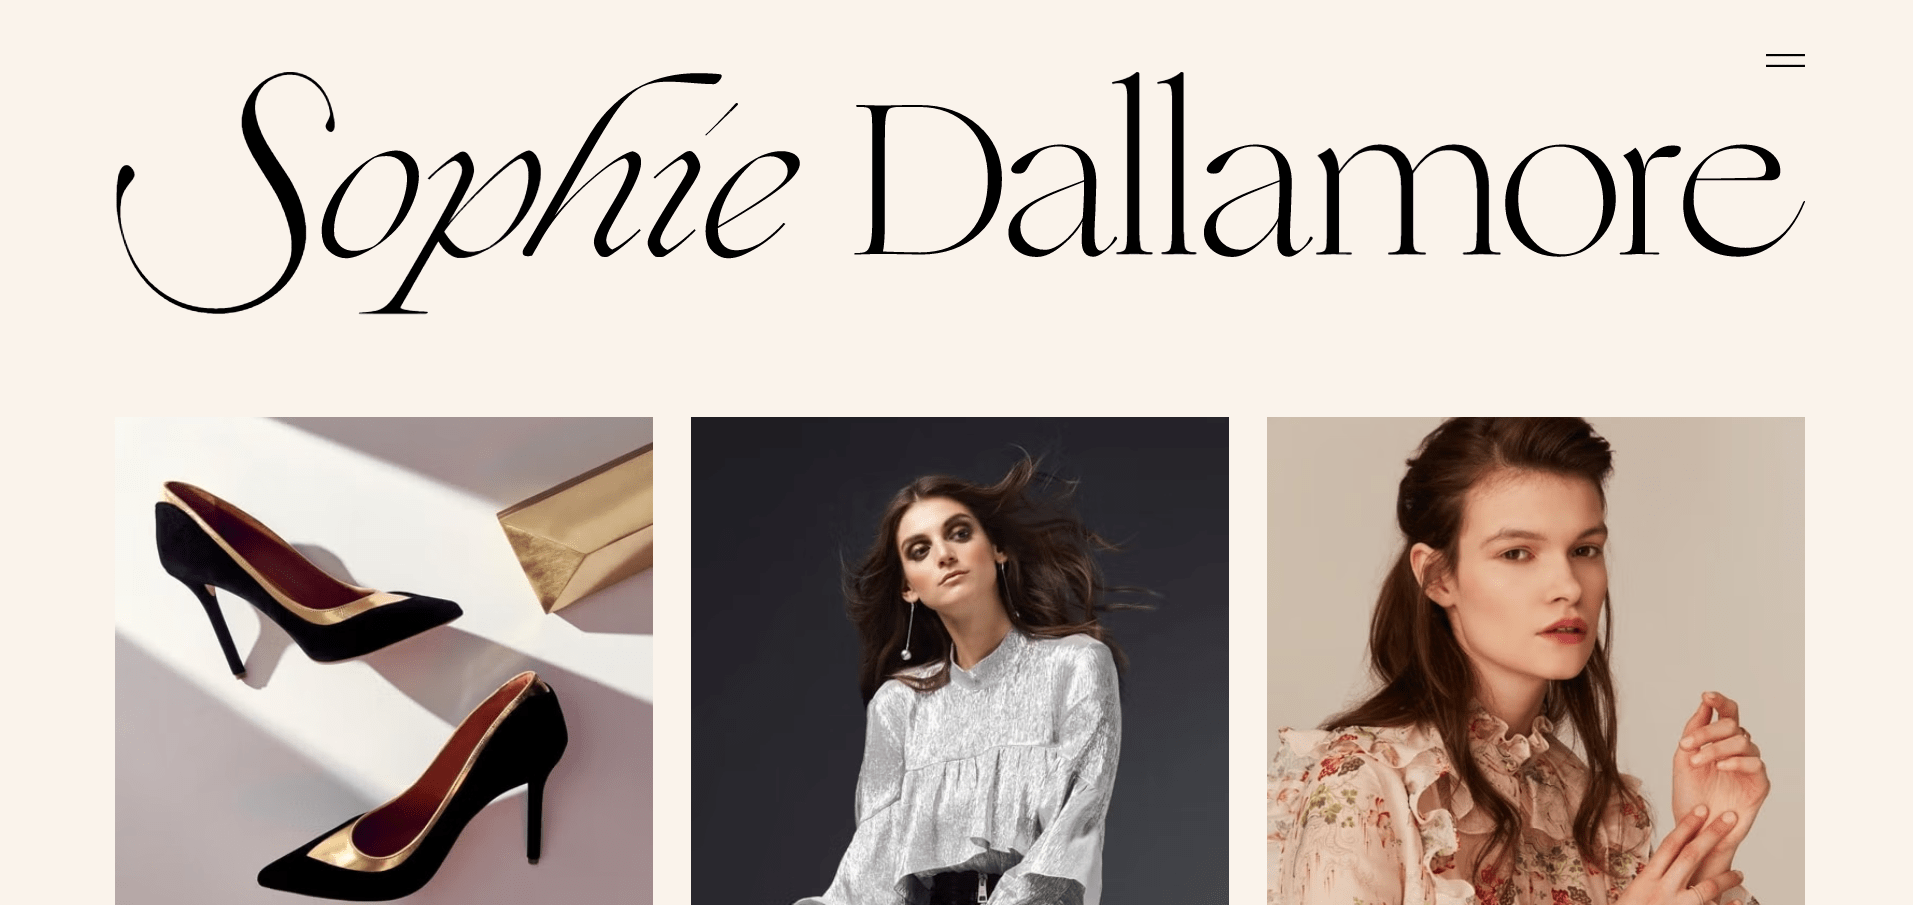 Landing page of Sophie Dallamore 